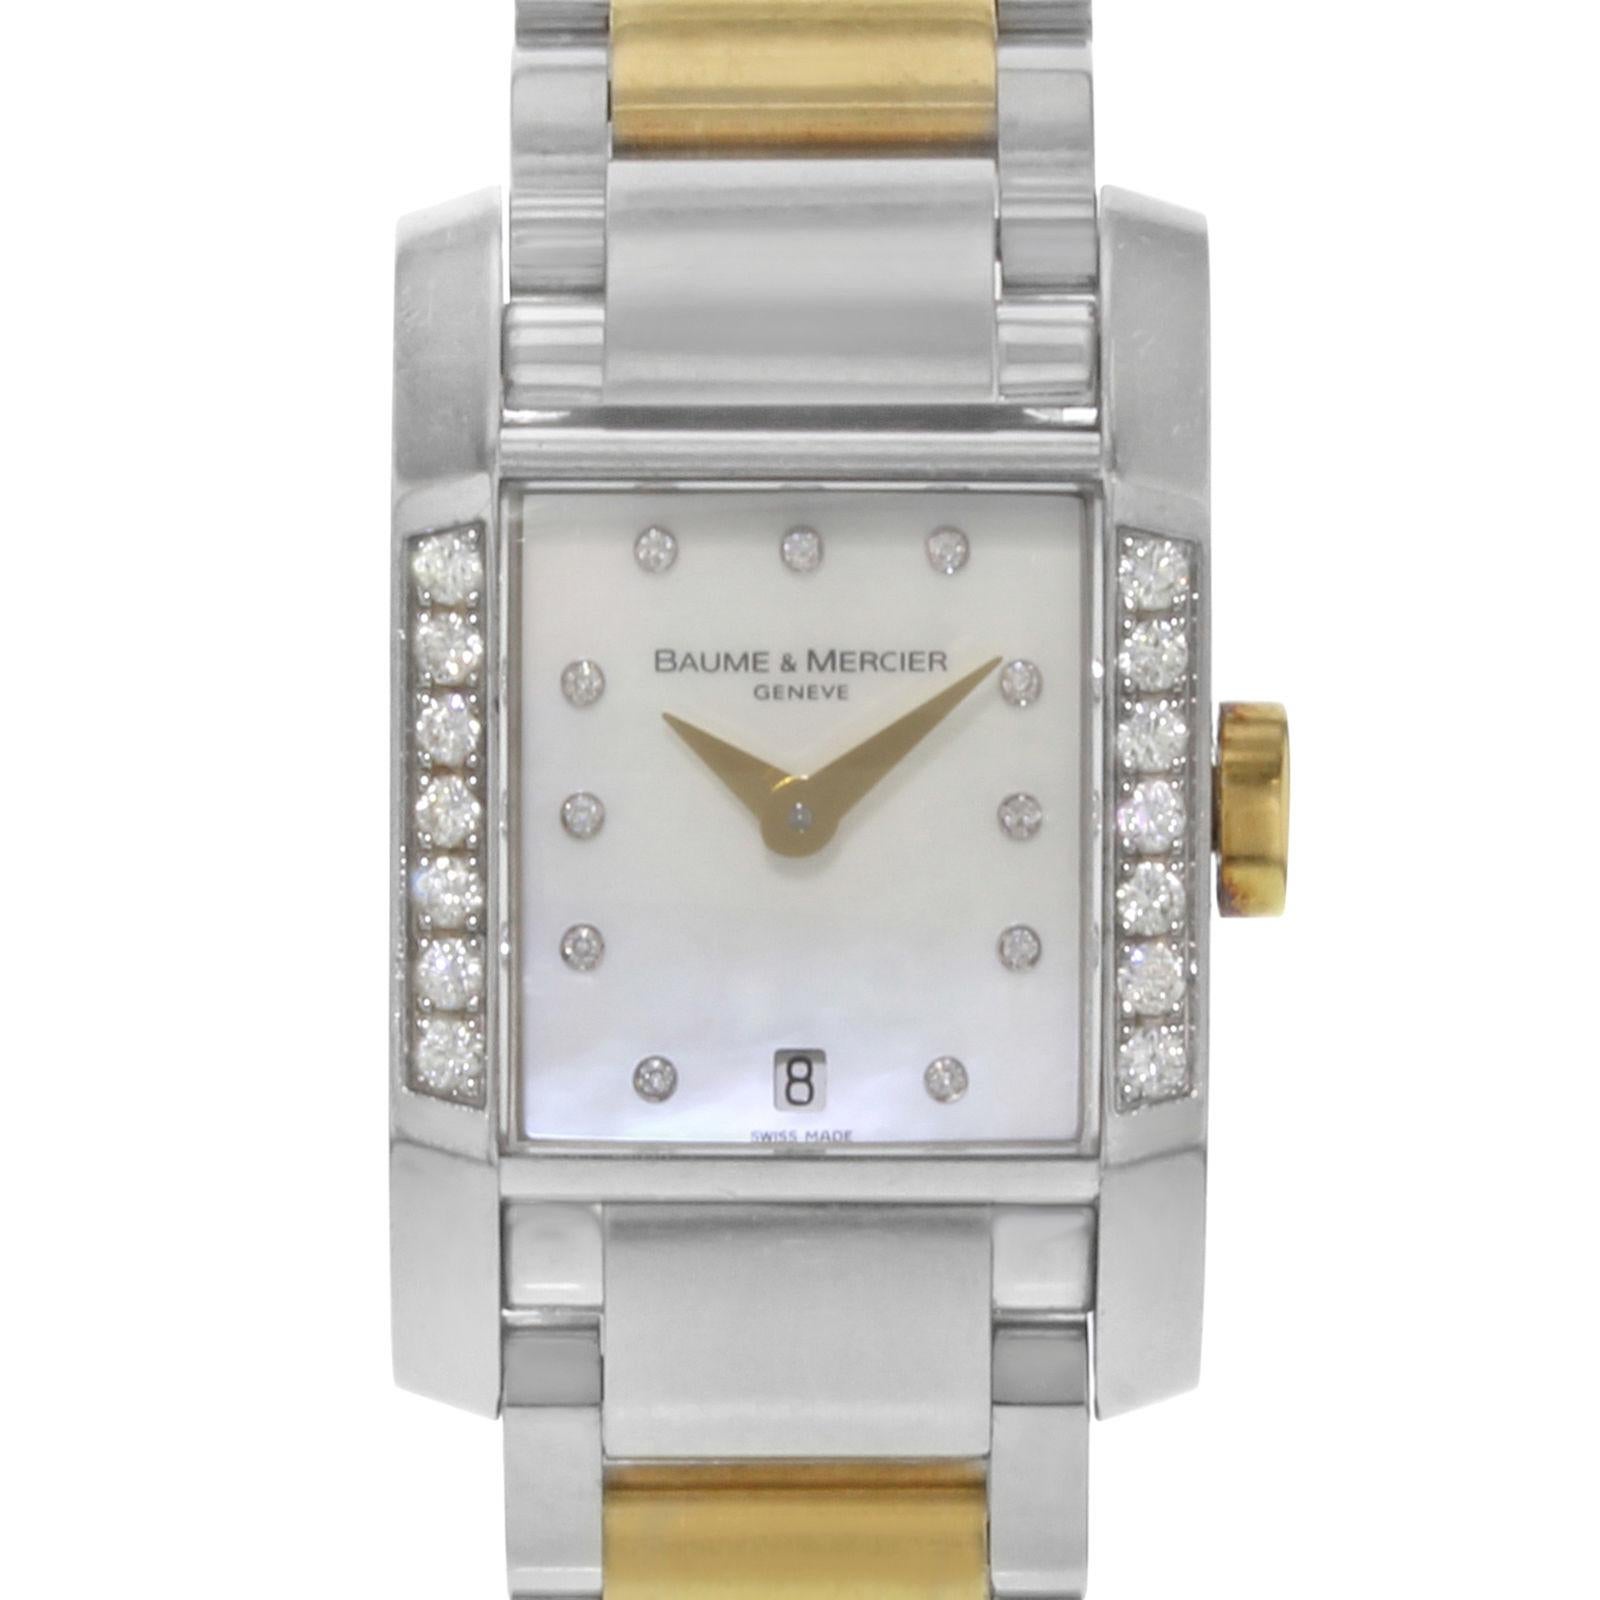 (18237)
This pre-owned Baume et Mercier Diamant MOA08599 is a beautiful Womens timepiece that is powered by a quartz movement which is cased in a stainless steel case. It has a rectangle shape face, date dial and has hand diamonds style markers. It